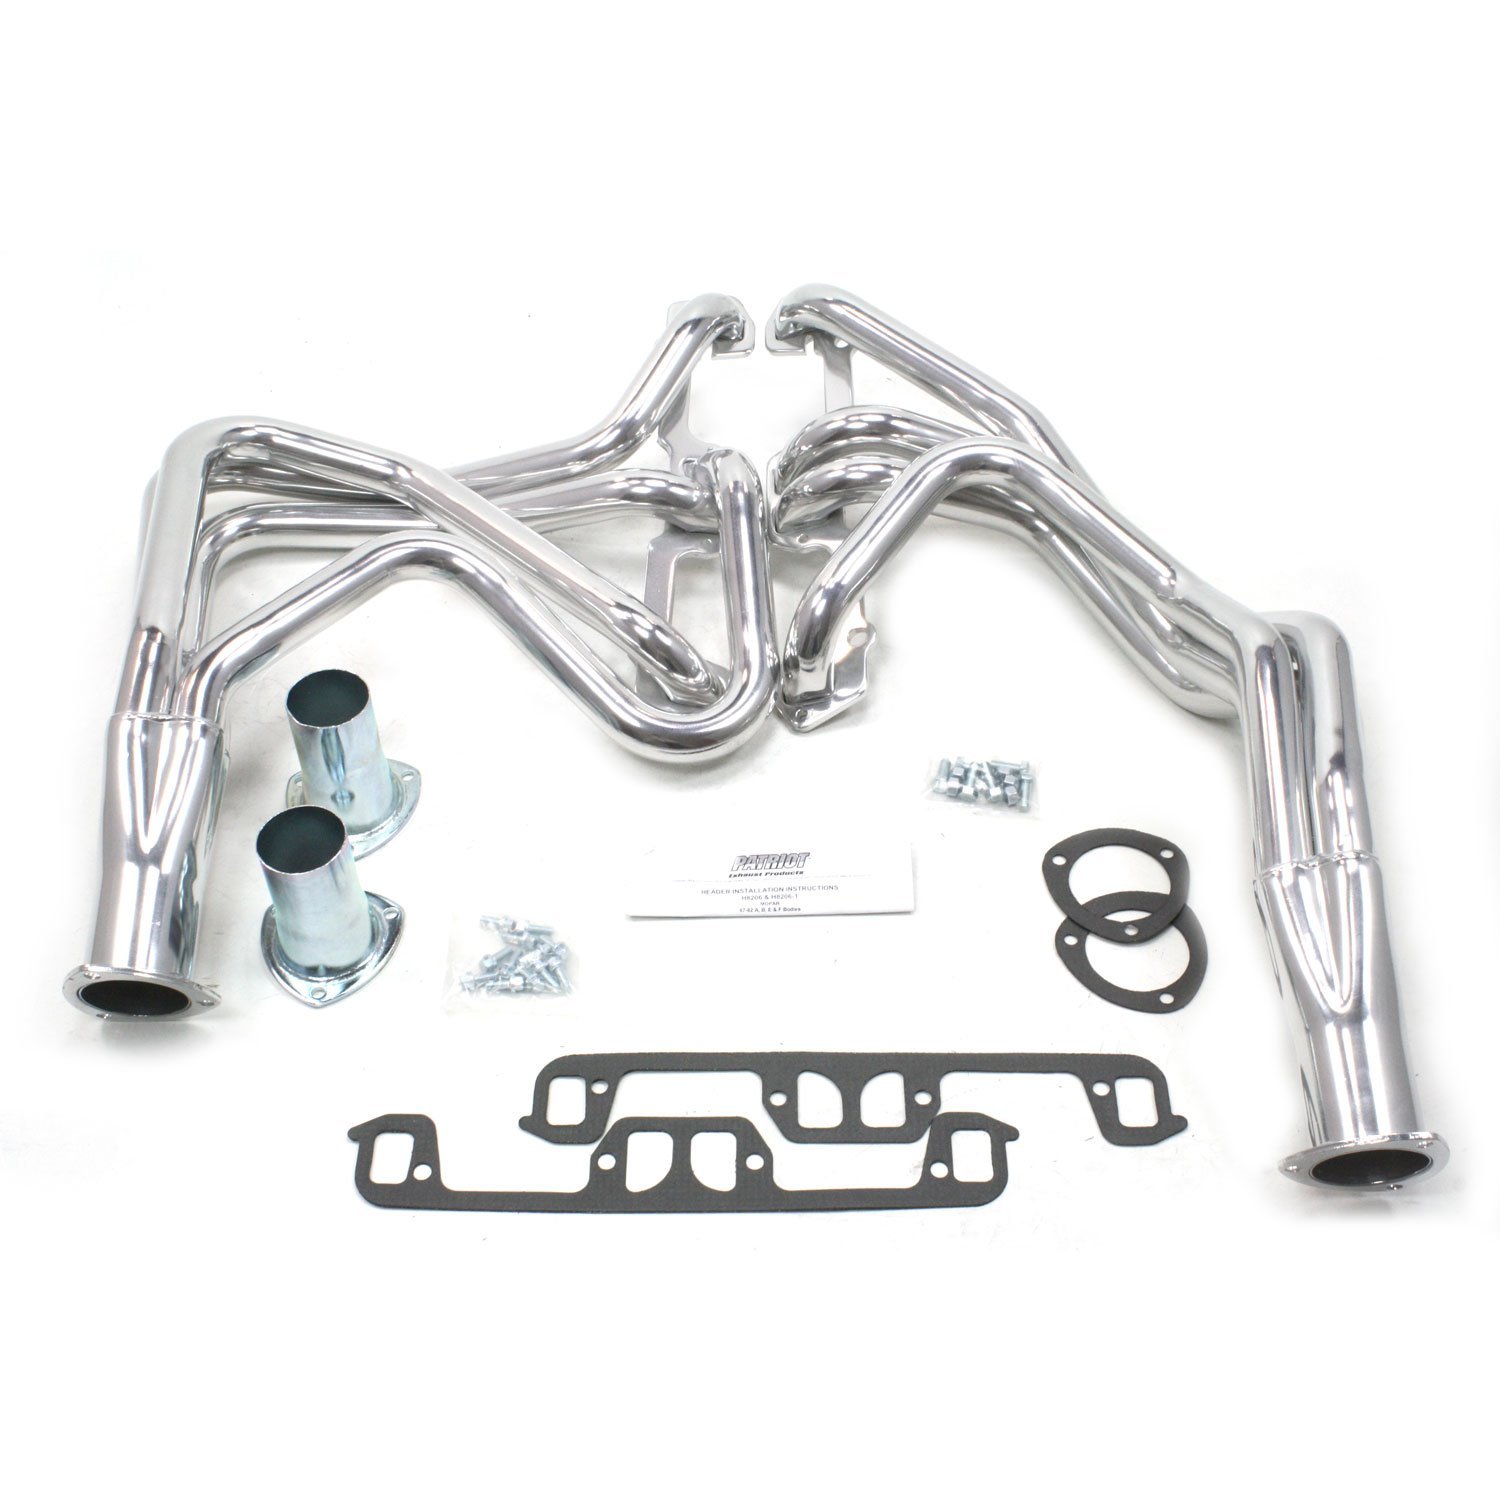 Dodge/Plymouth Specific Fit Headers All 1967-1982 A, B, E, & F Bodies